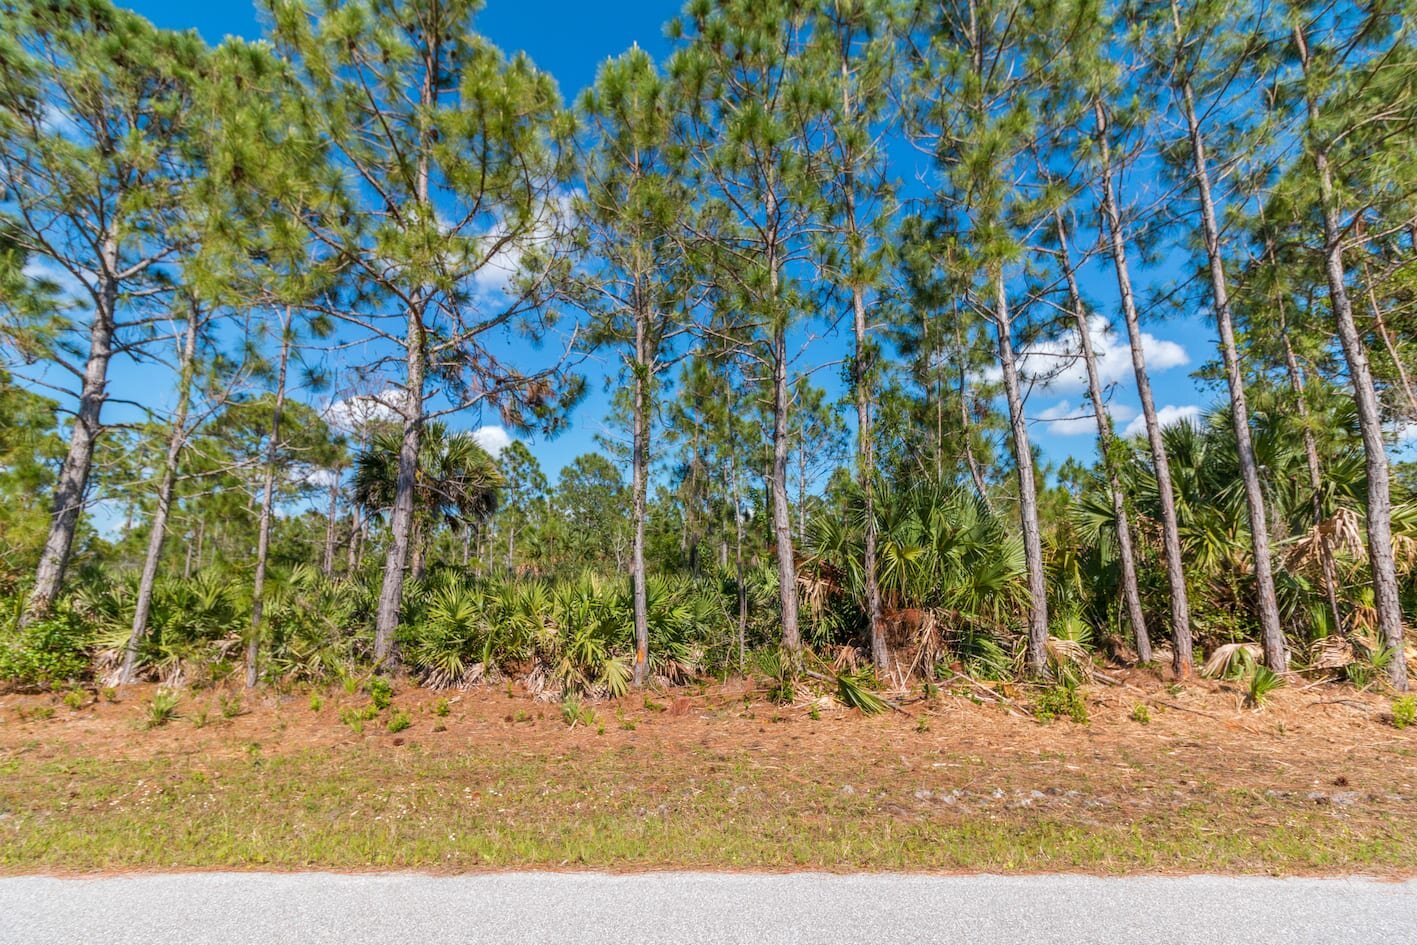 Charlotte County land for sale - Compass Land USA